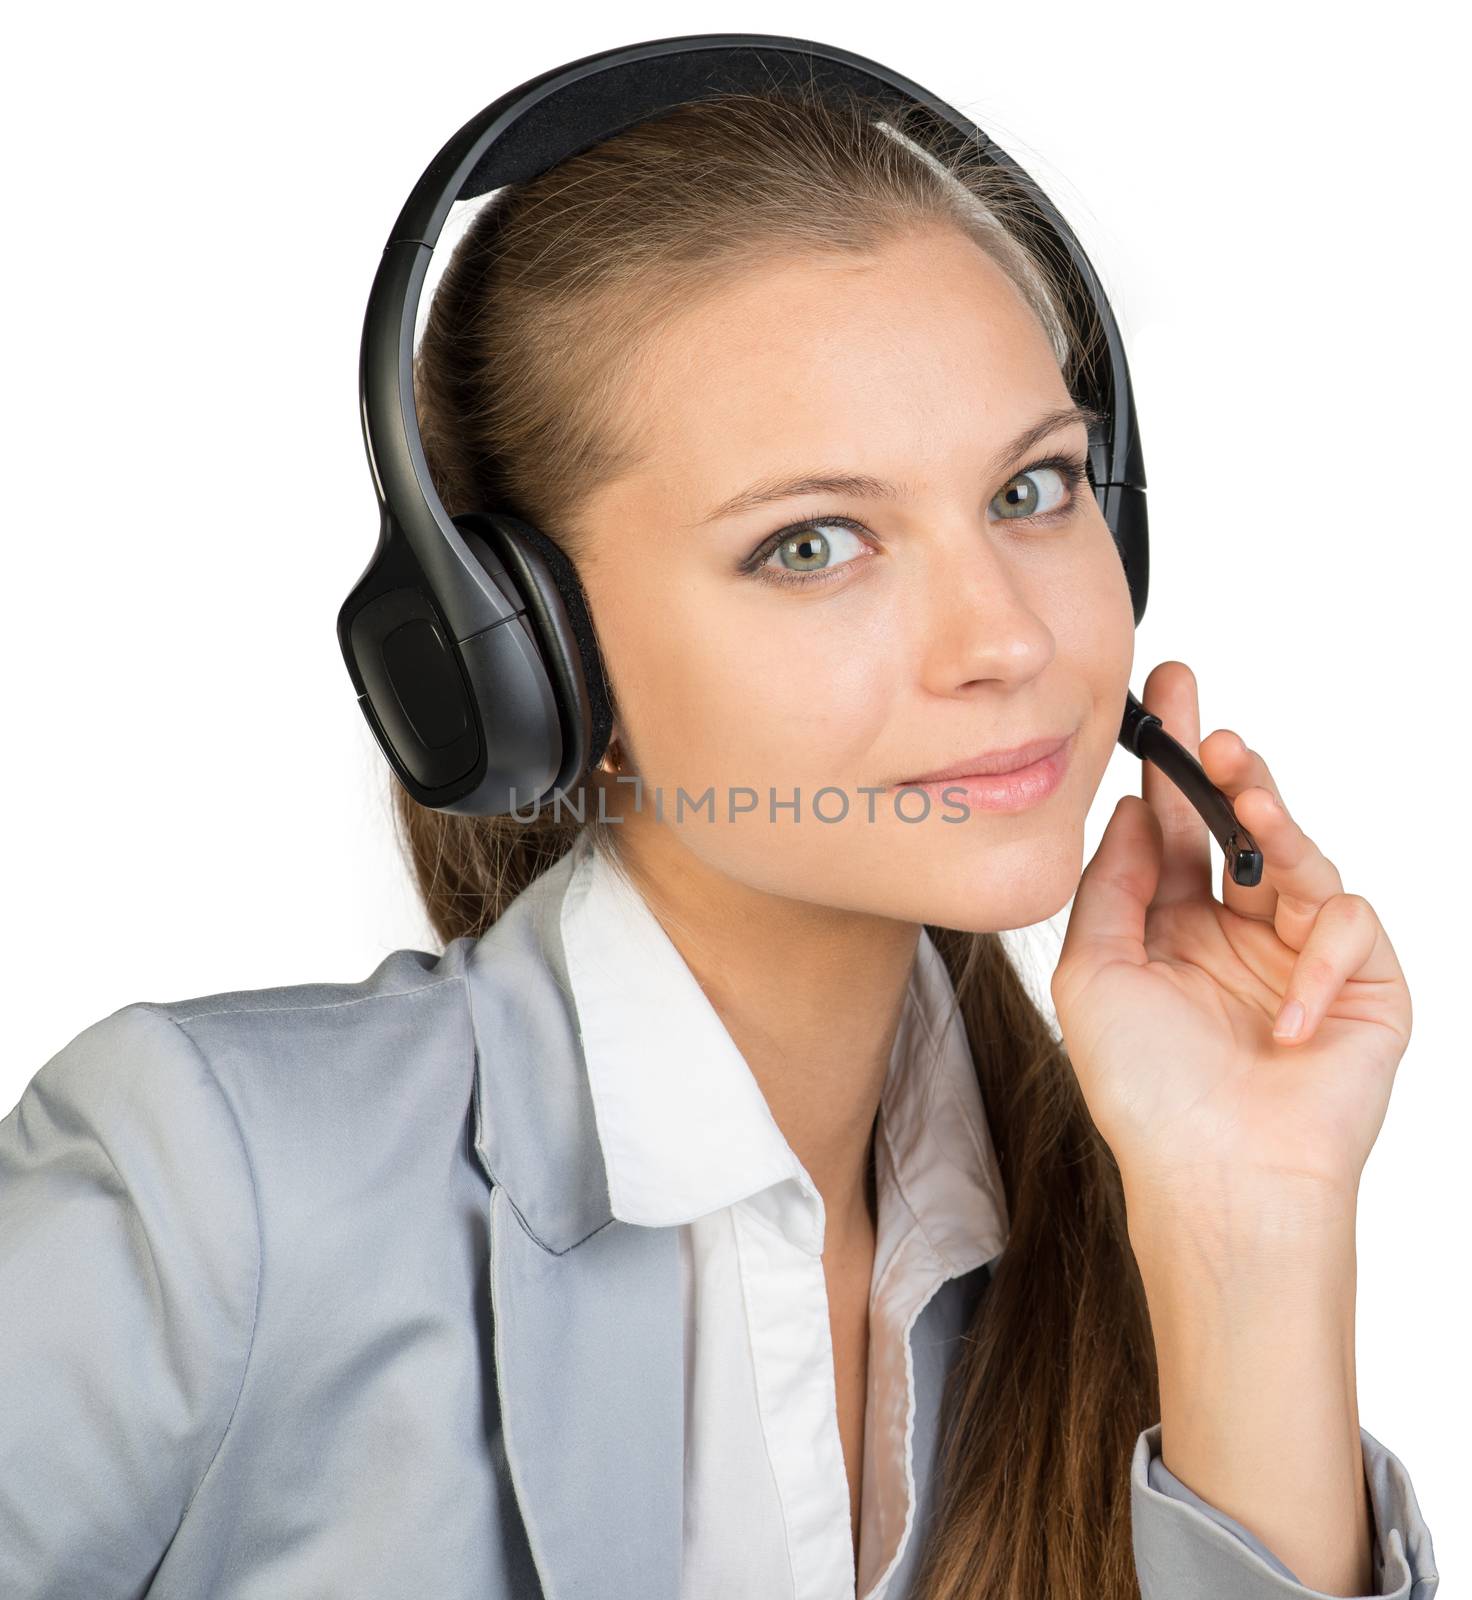 Businesswoman in headset, with her fingers on microphone boom, looking at camera. Isolated over white background